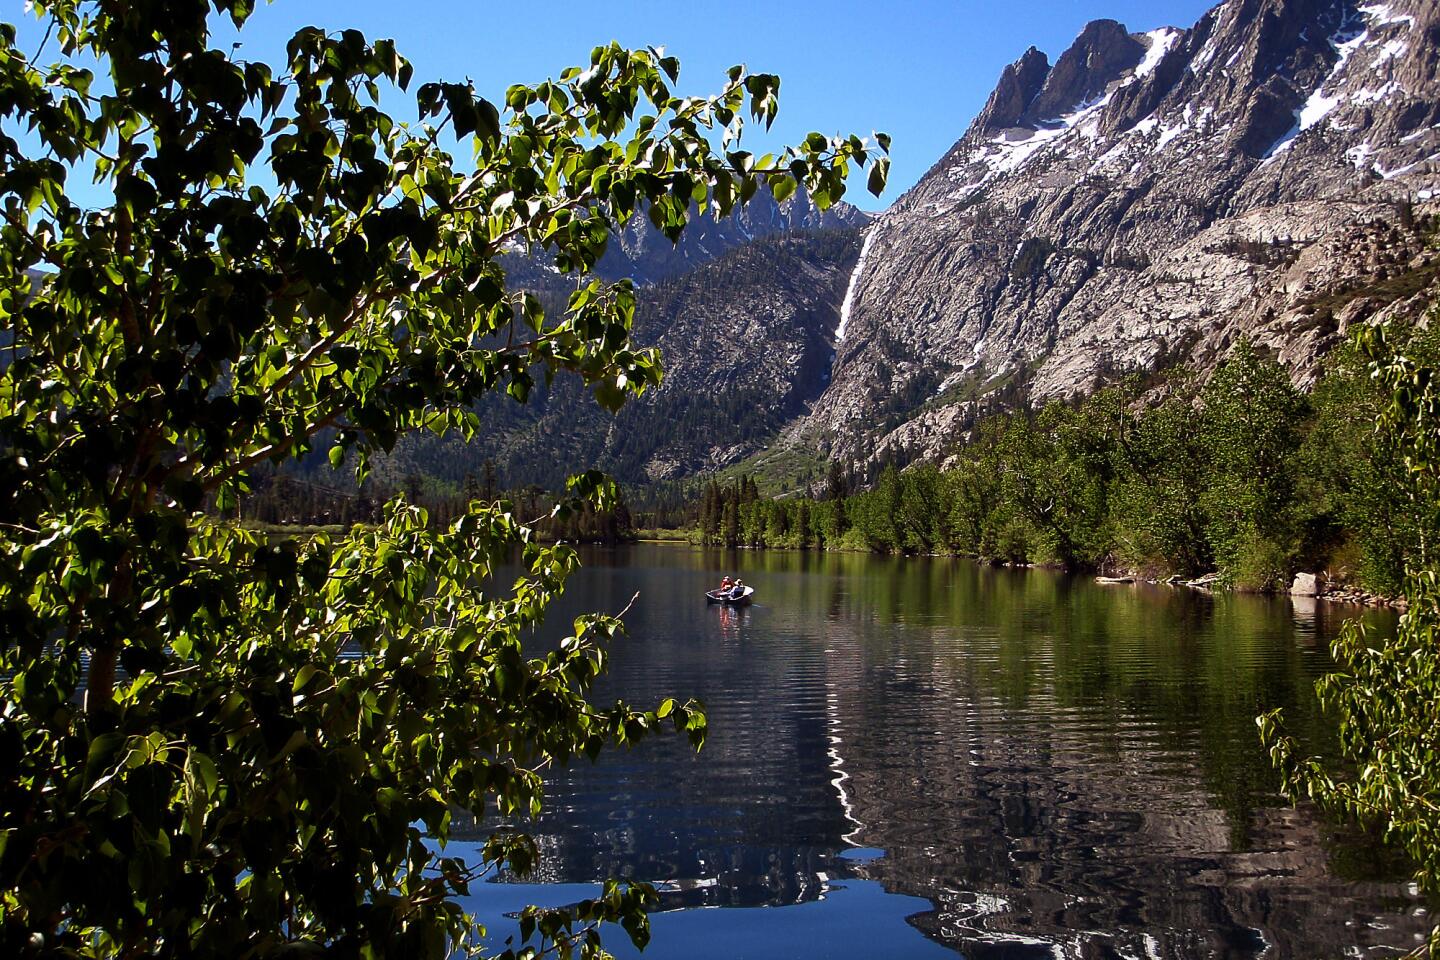 The grand setting of Gull Lake makes for relaxing days in the area around June Lake, Calif. Feel like enjoying the scenery from the lake? Boat rentals are available.